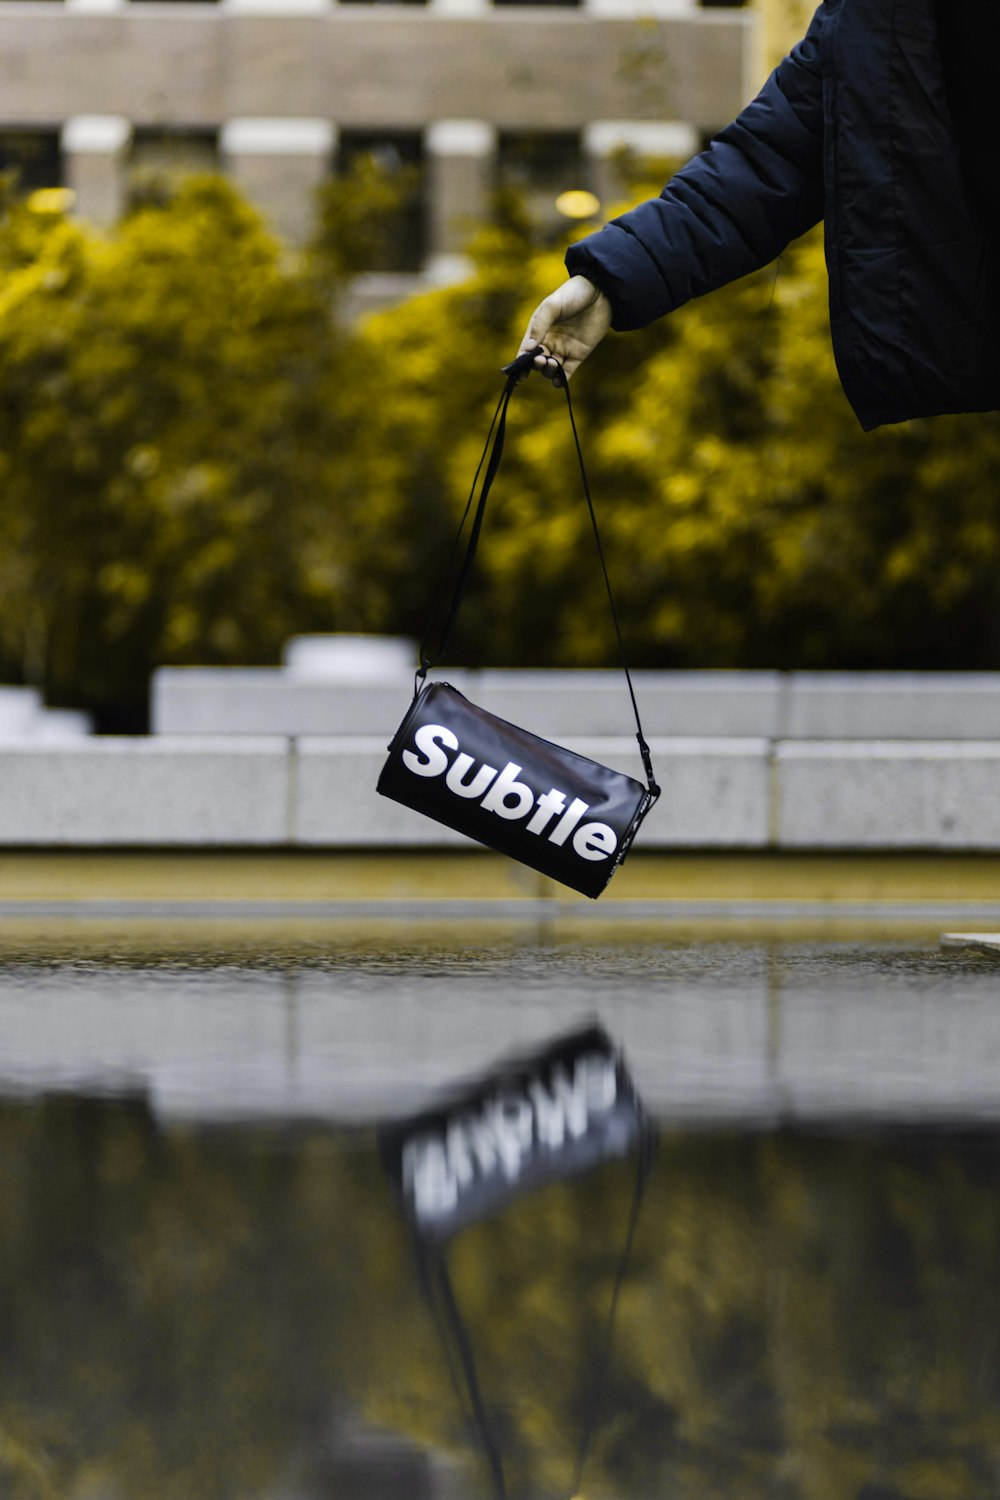 a person is holding a subbie bag in the rain